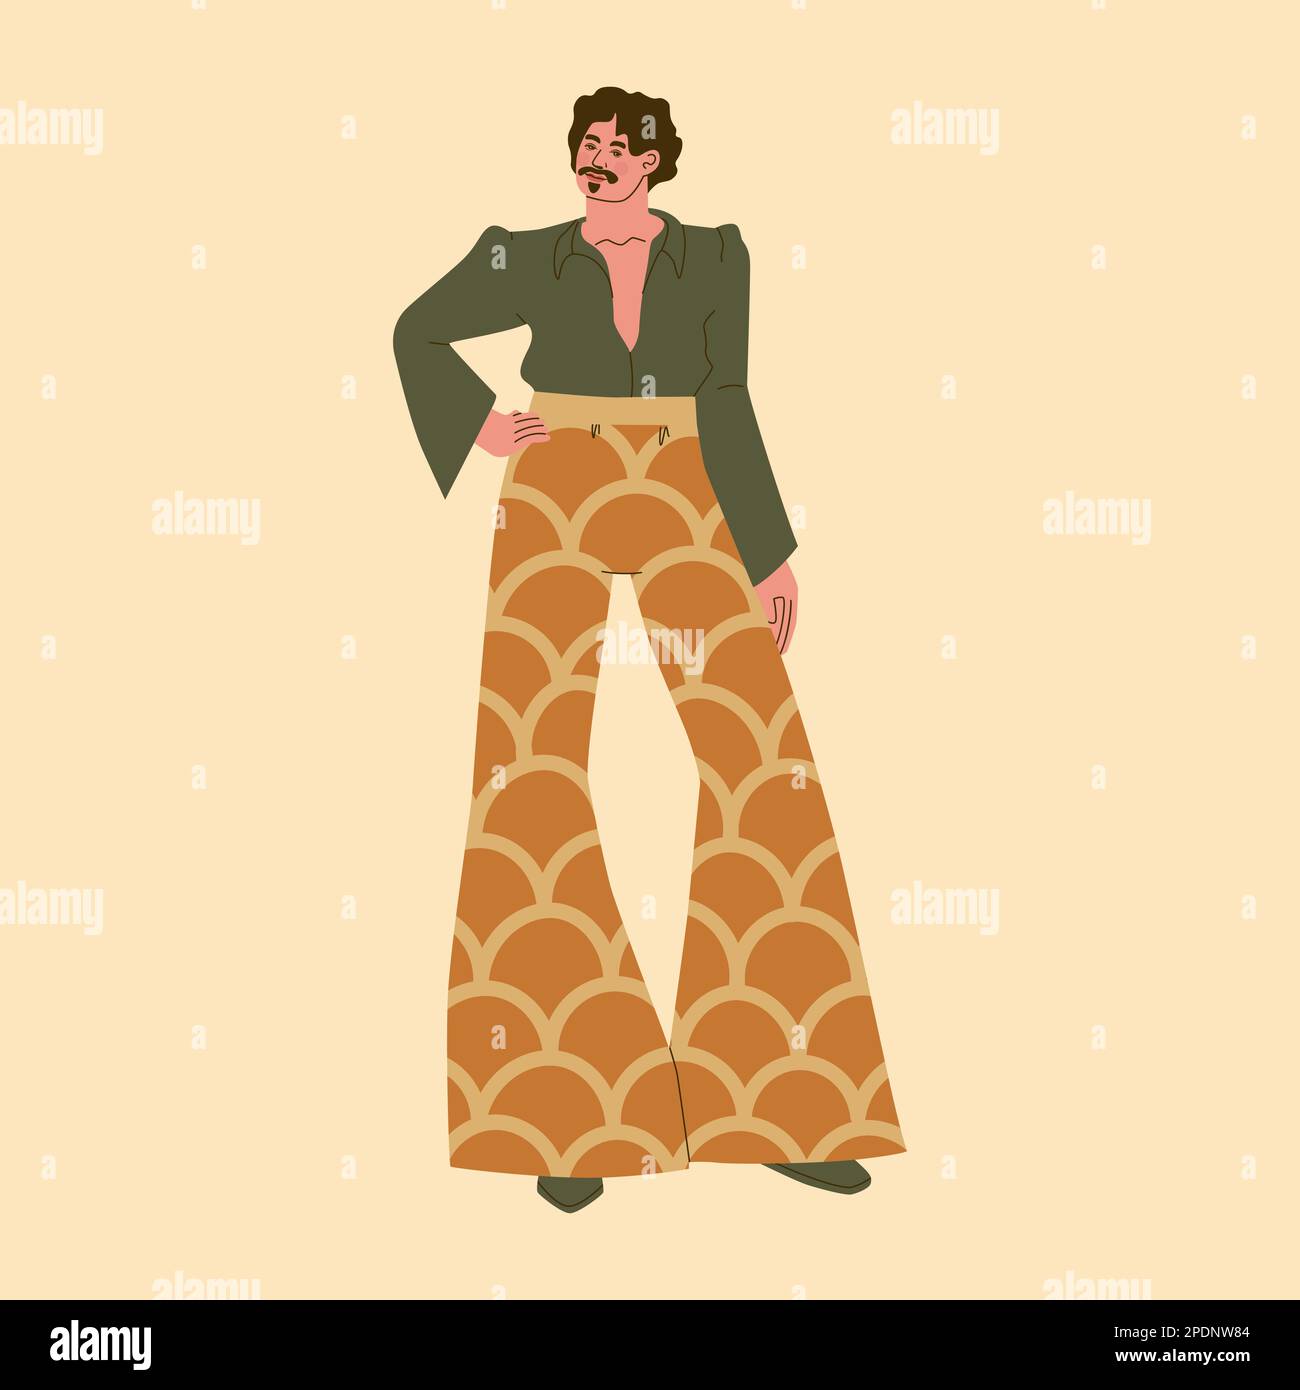 Fashion and style of the 70s. Cute young man in wide flared pants, a blouse with wide sleeves. Vector trendy illustration. Stock Vector